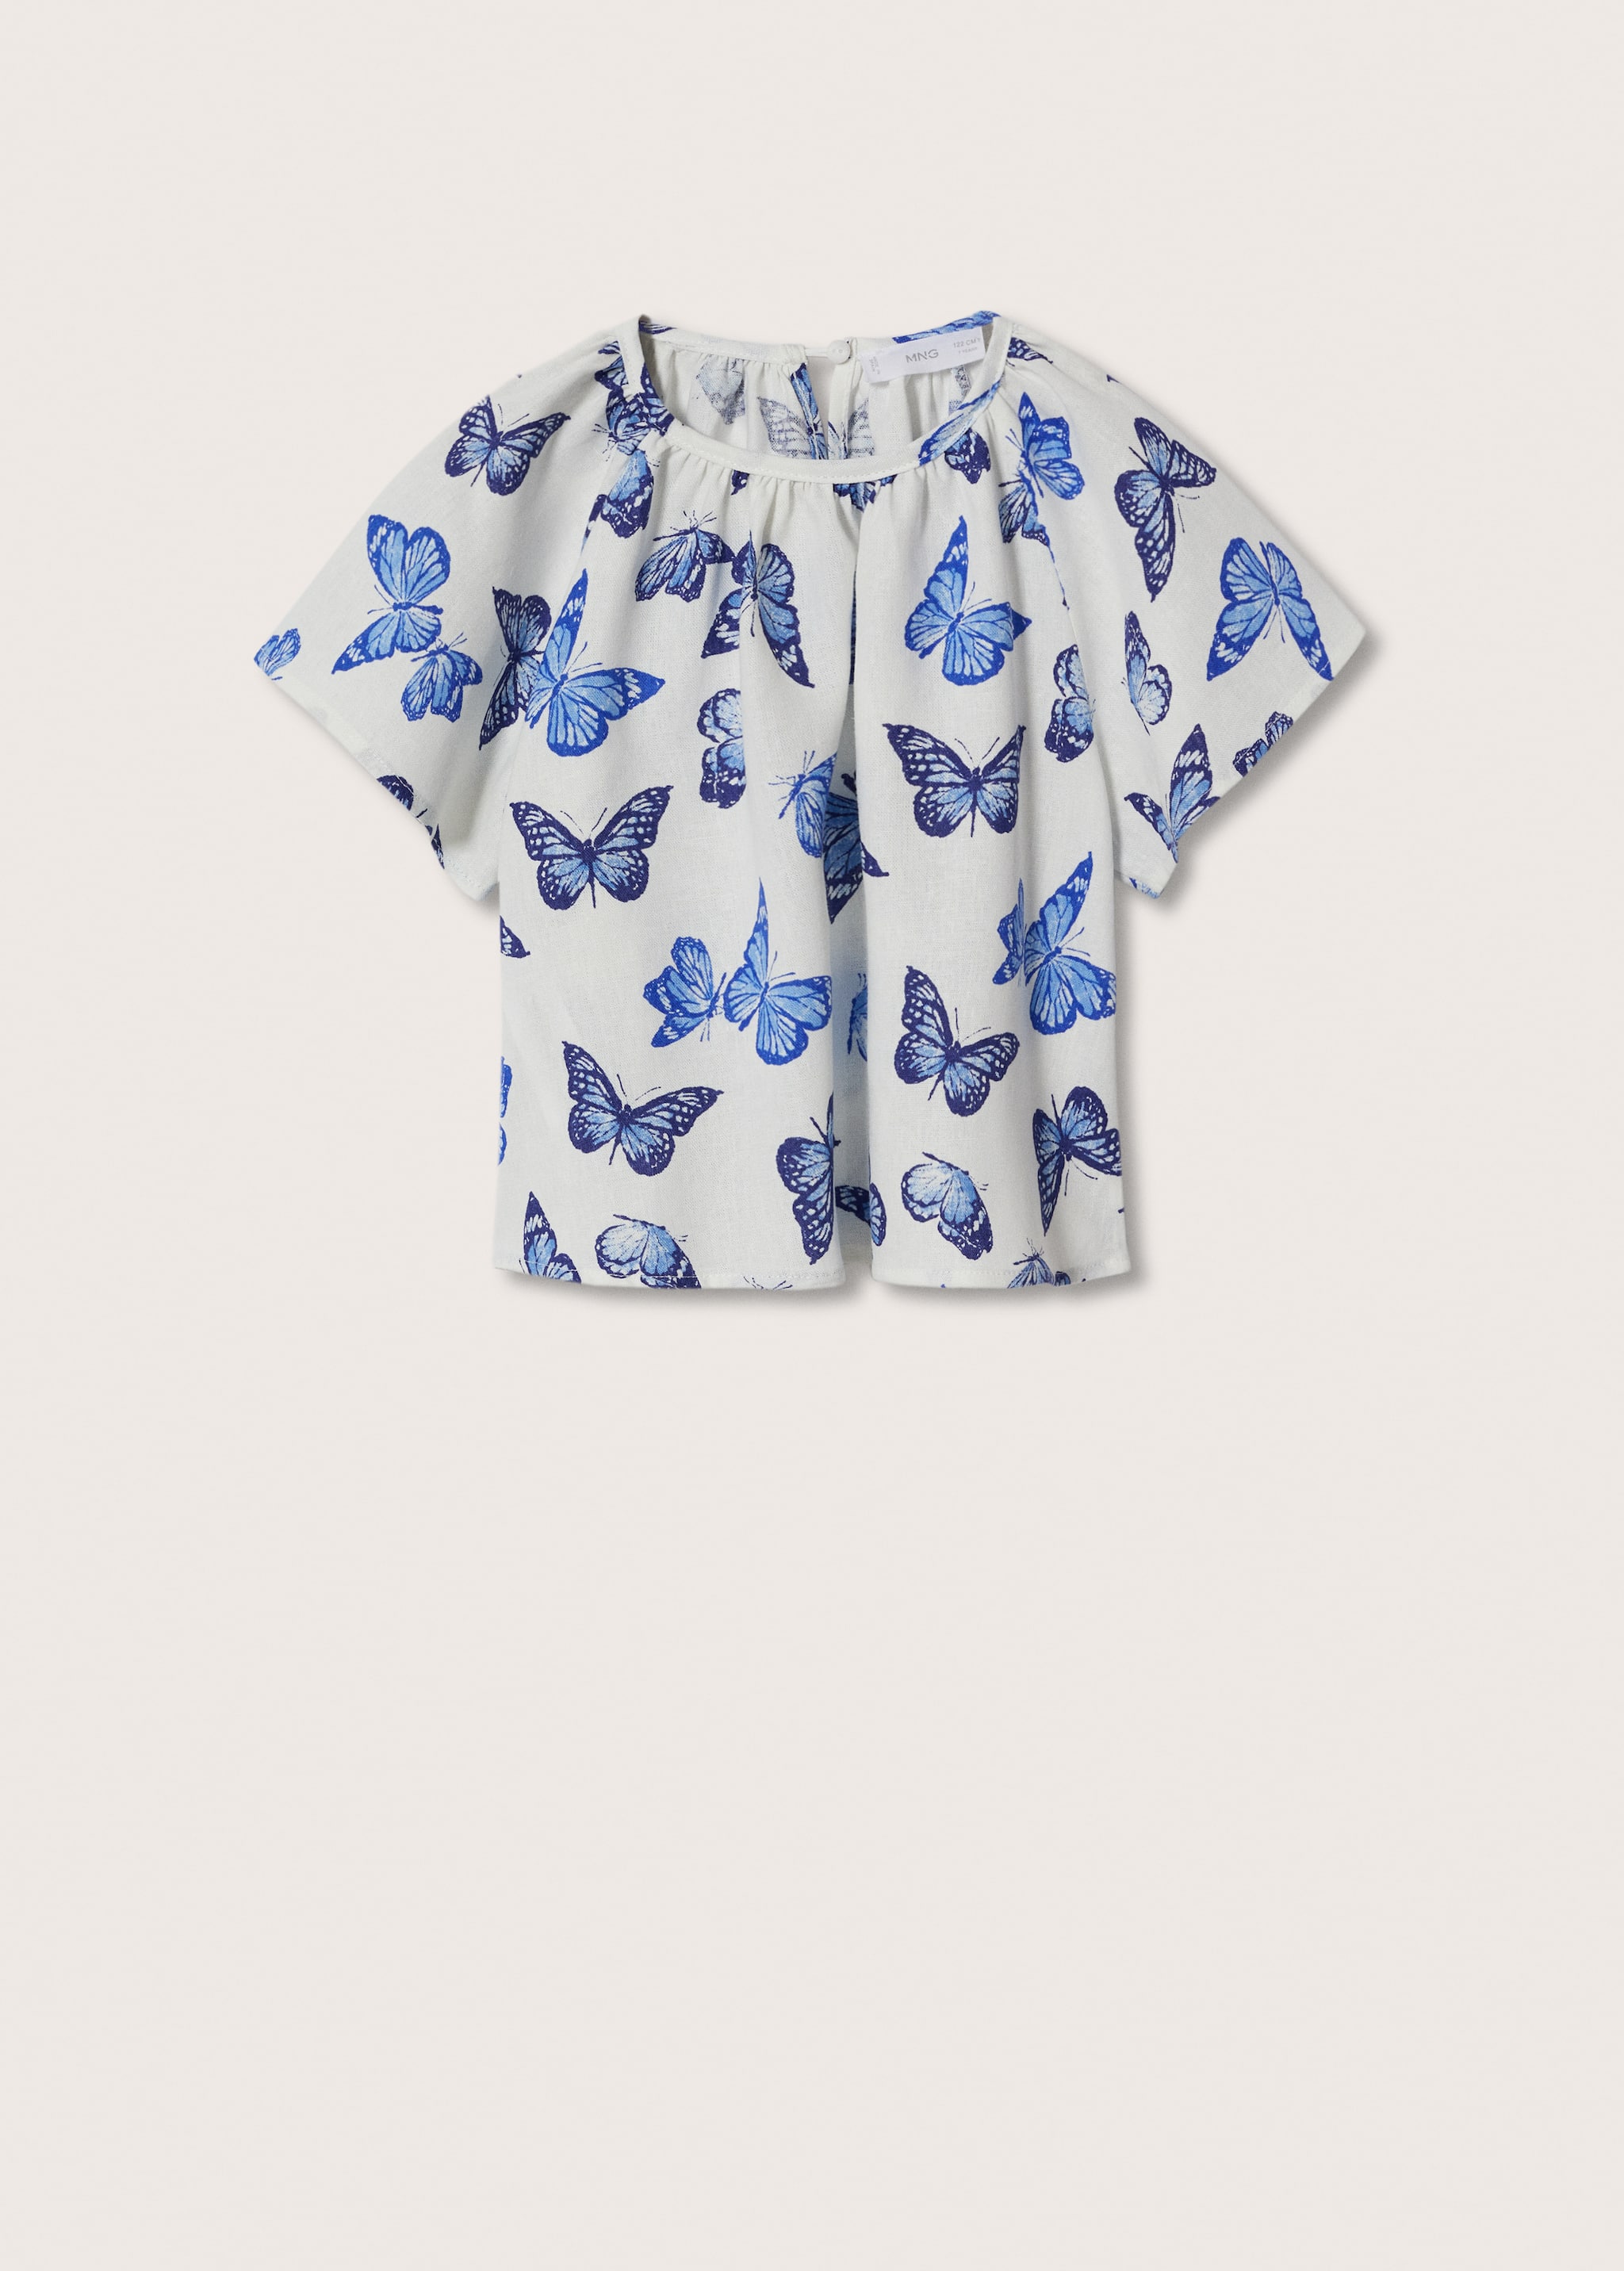 Linen blouse with butterflies - Article without model